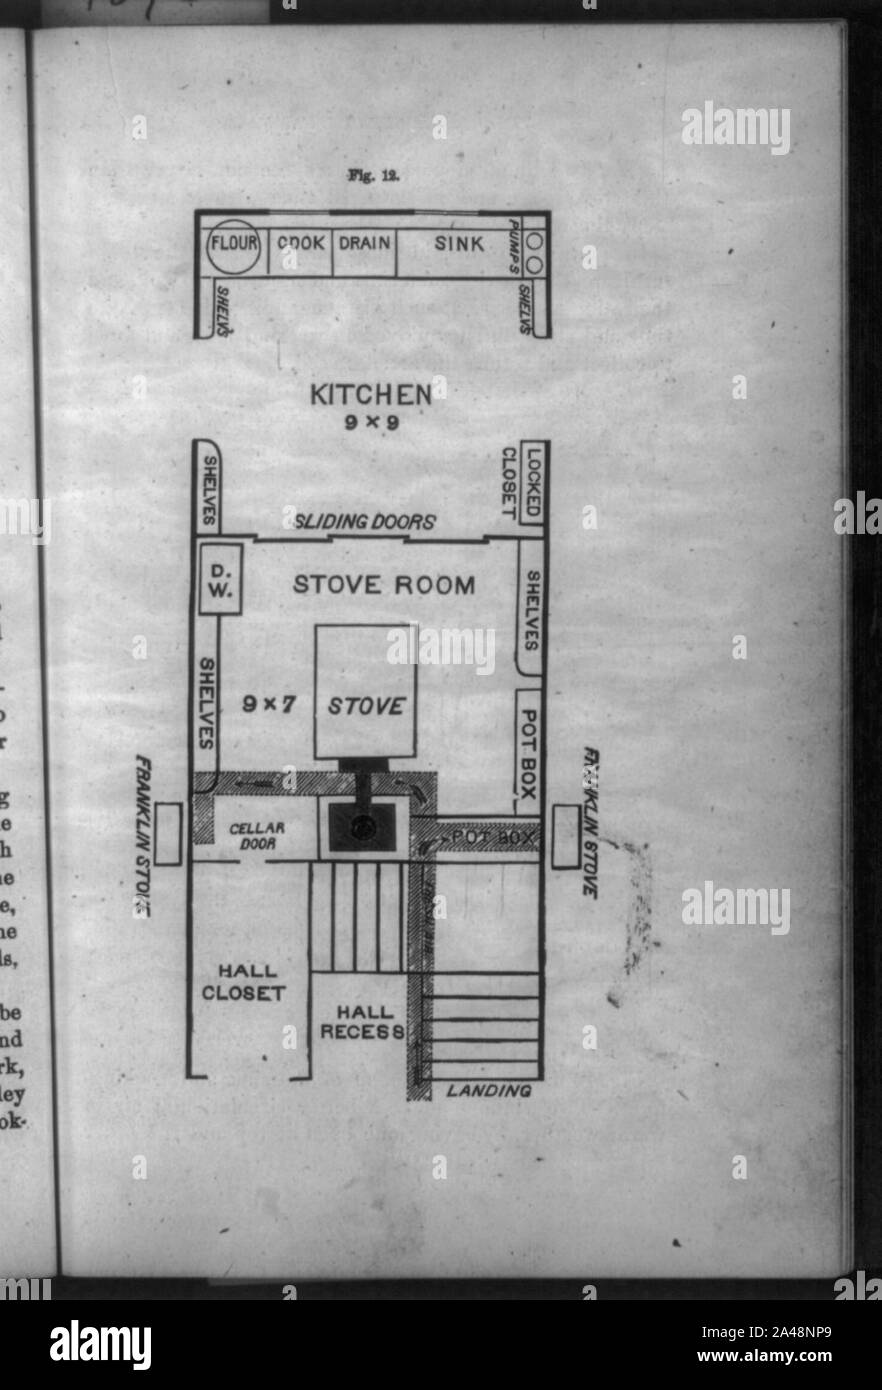 Floor plan of kitchen and stove room Stock Photo